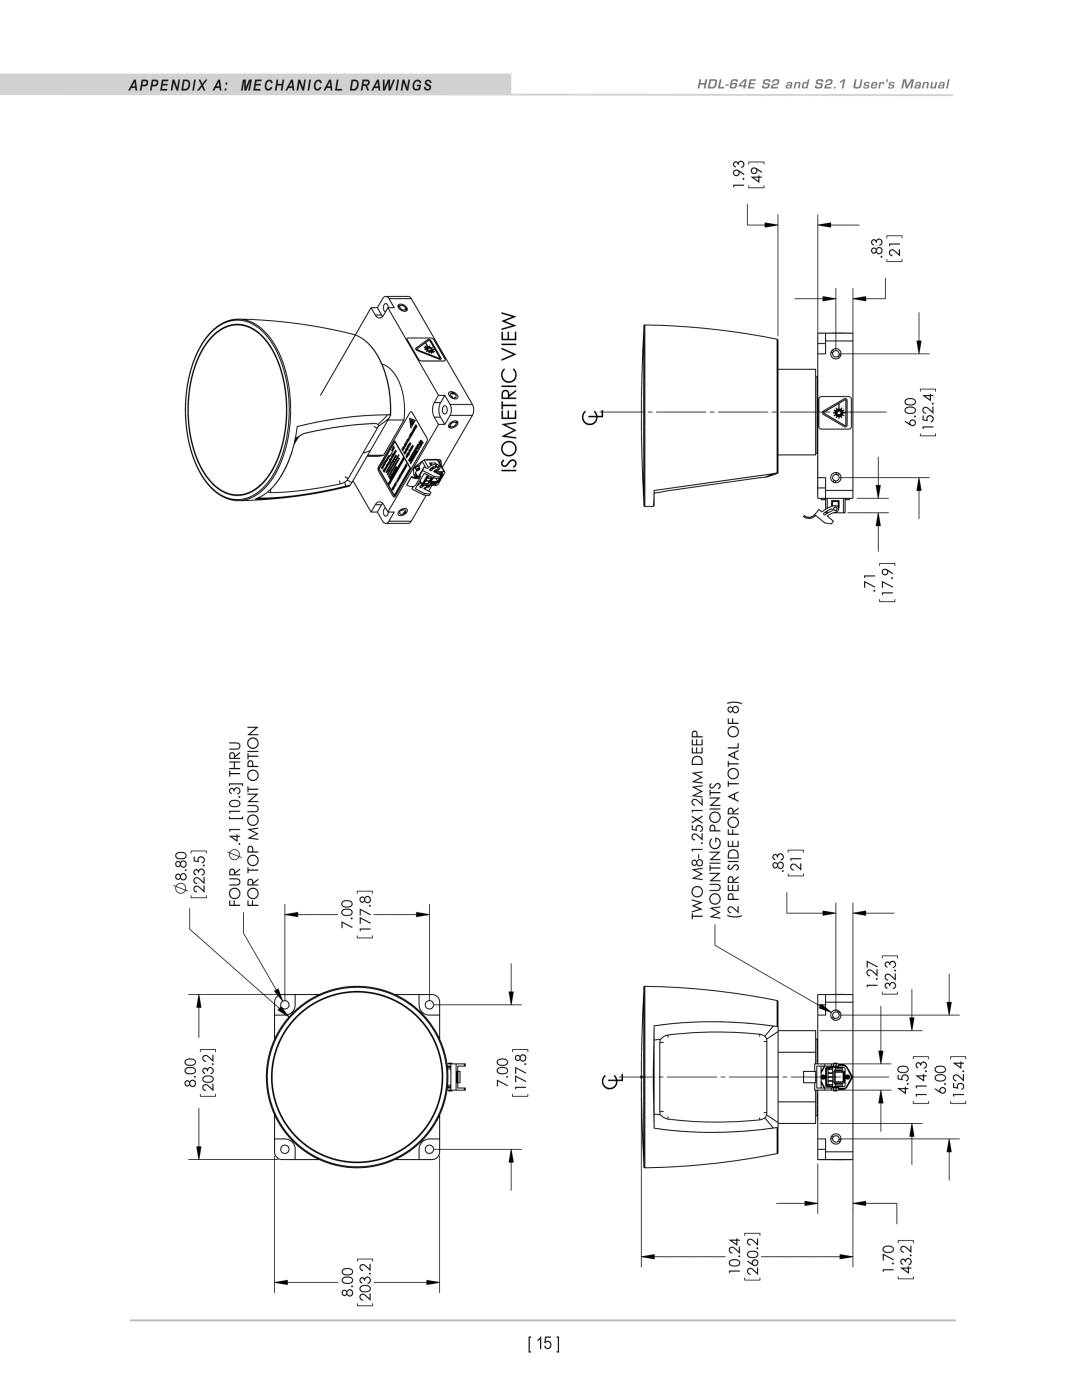 Velodyne Acoustics HDL-64E S2.1 user manual Isometric View, APPendix a MechanicaL draWinGs 